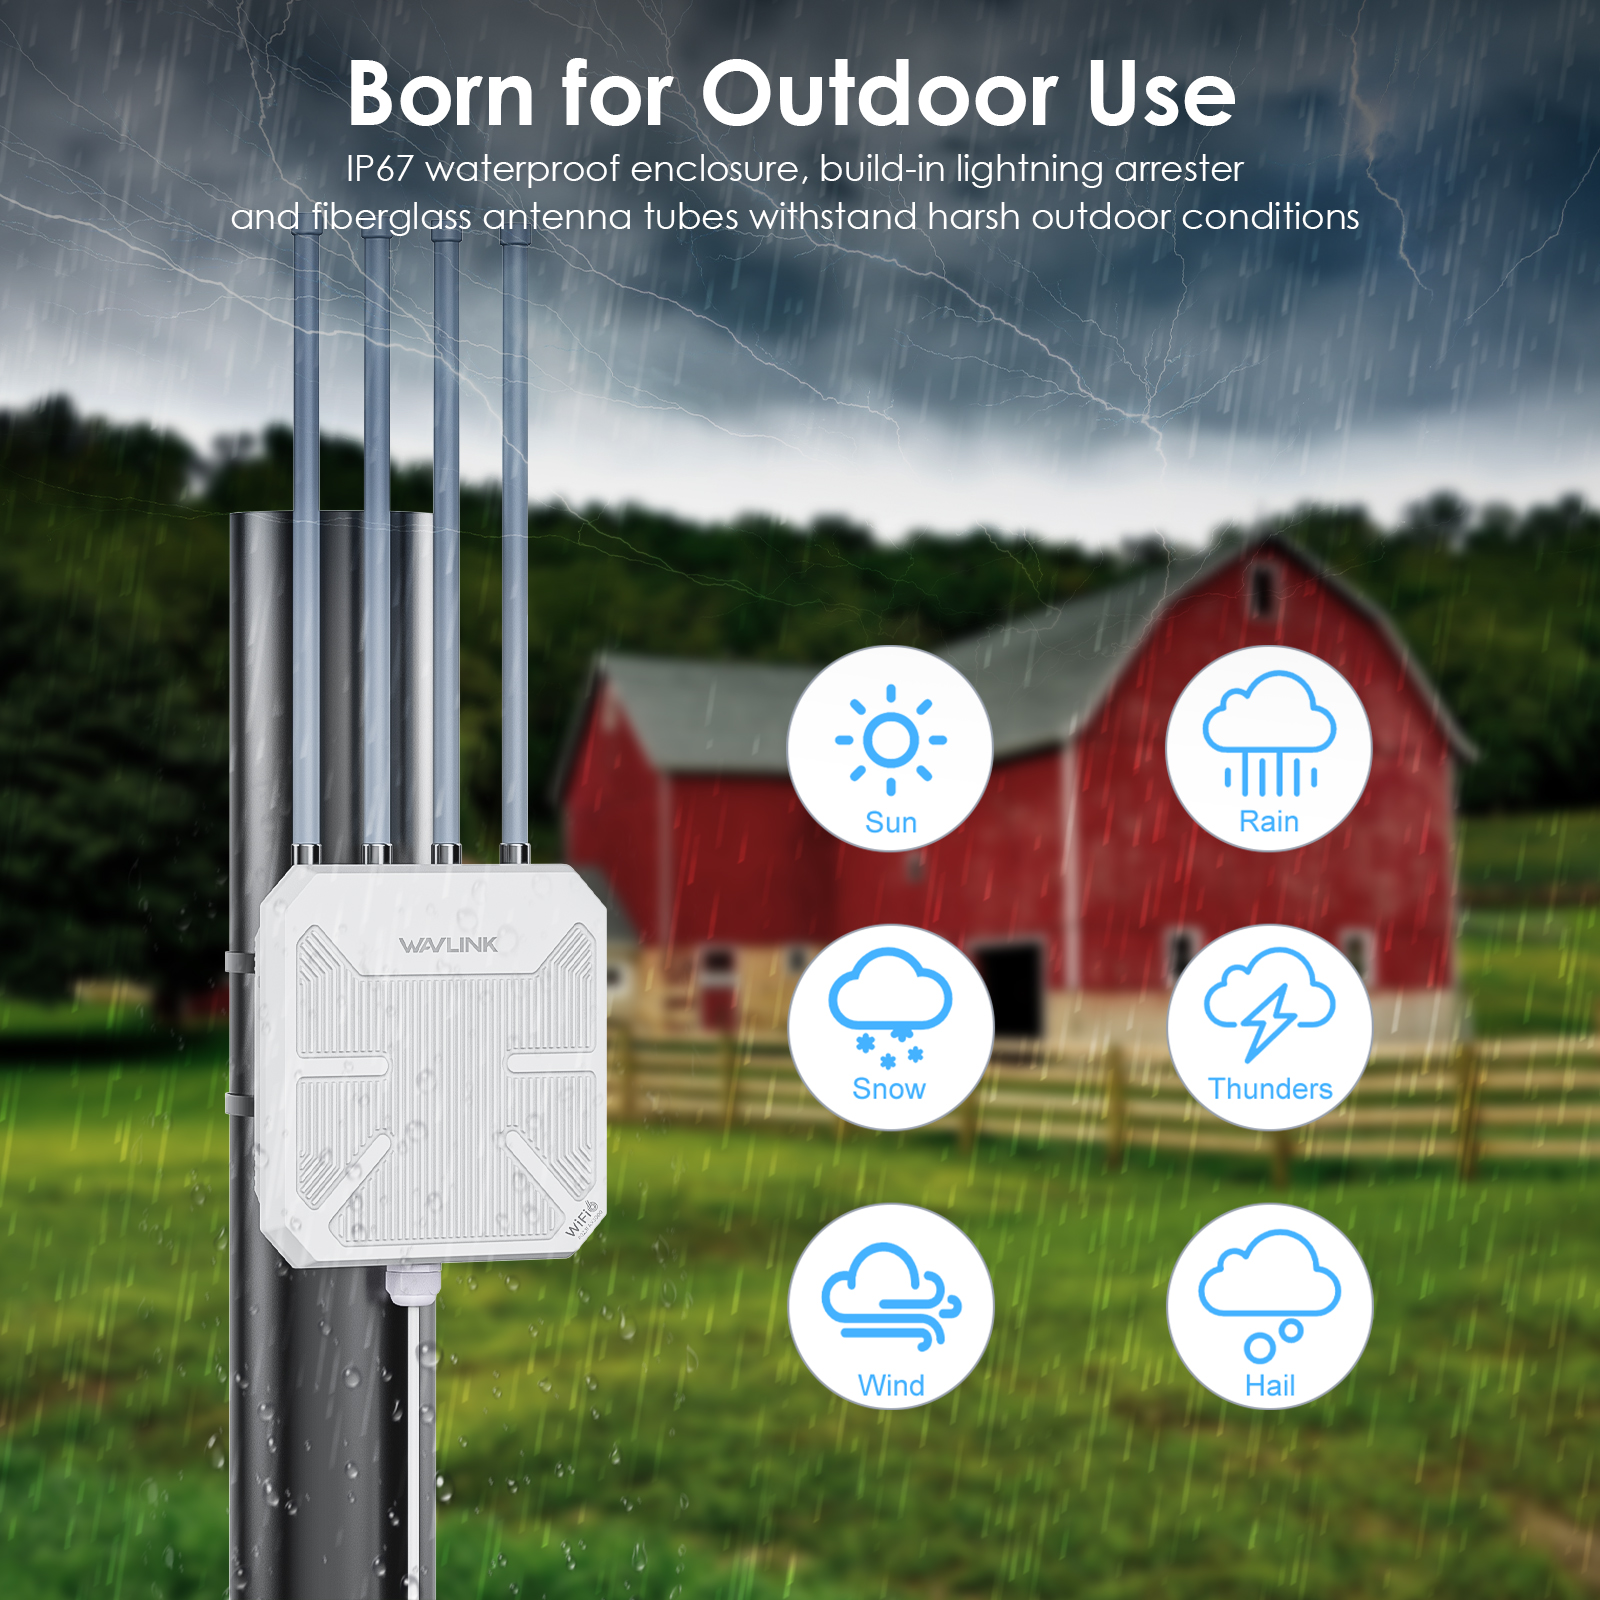 WAVLINK WiFi6 Outdoor Access Point, Dual Band 2.4G+5G AX3000 Long Range Outdoor WiFi Mesh Extender with PoE/4x8dBi High-gain Antennas/IP67 Weatherproof Enclosure/Signal Booster Amplifier 4